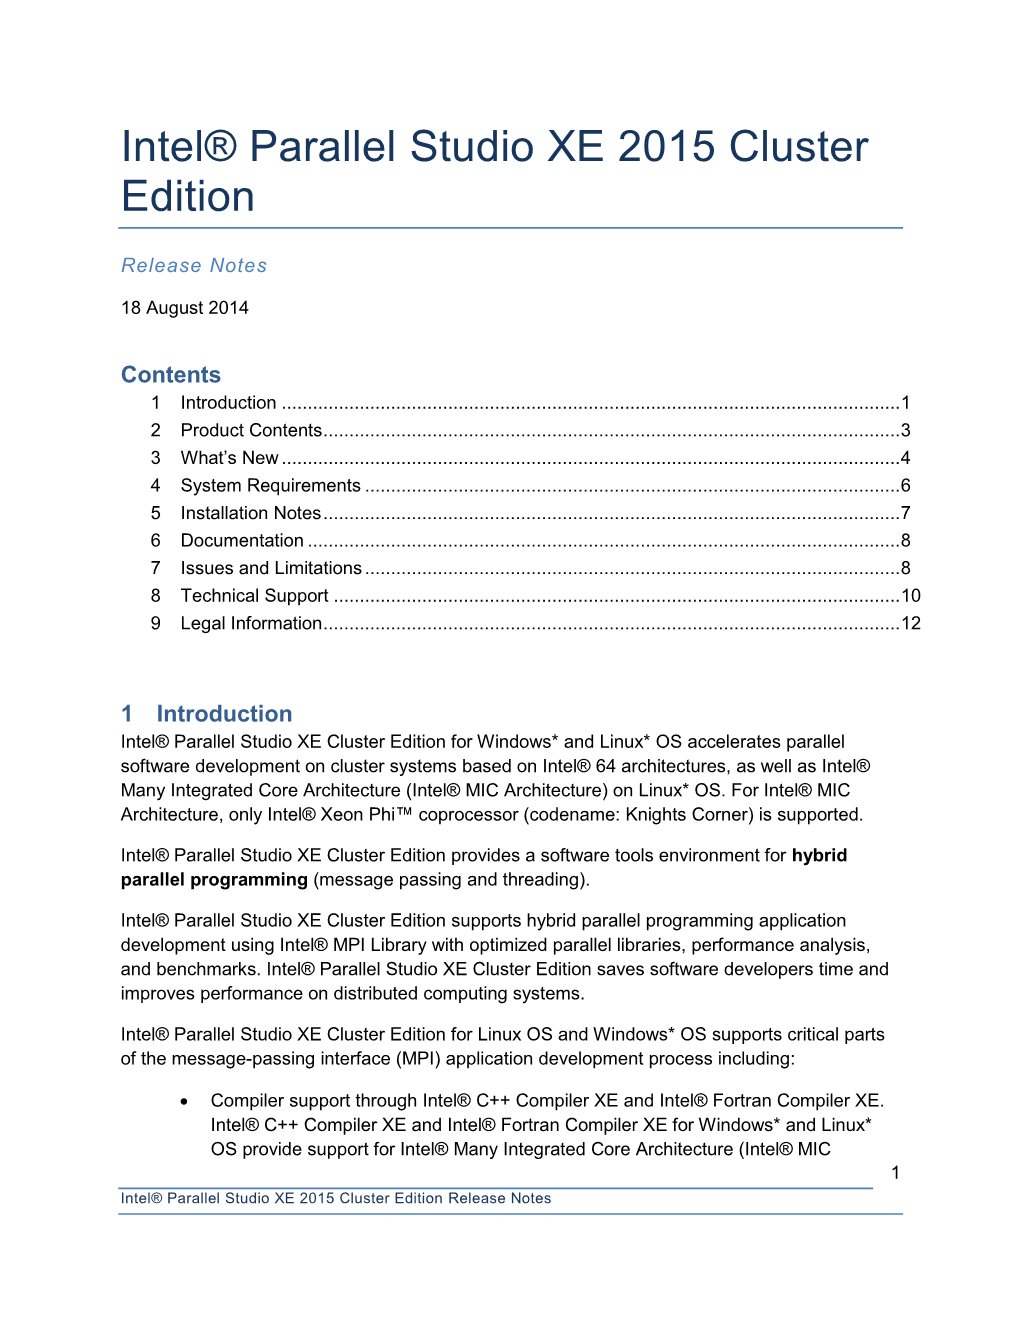 Intel® Parallel Studio XE 2015 Cluster Edition Release Notes